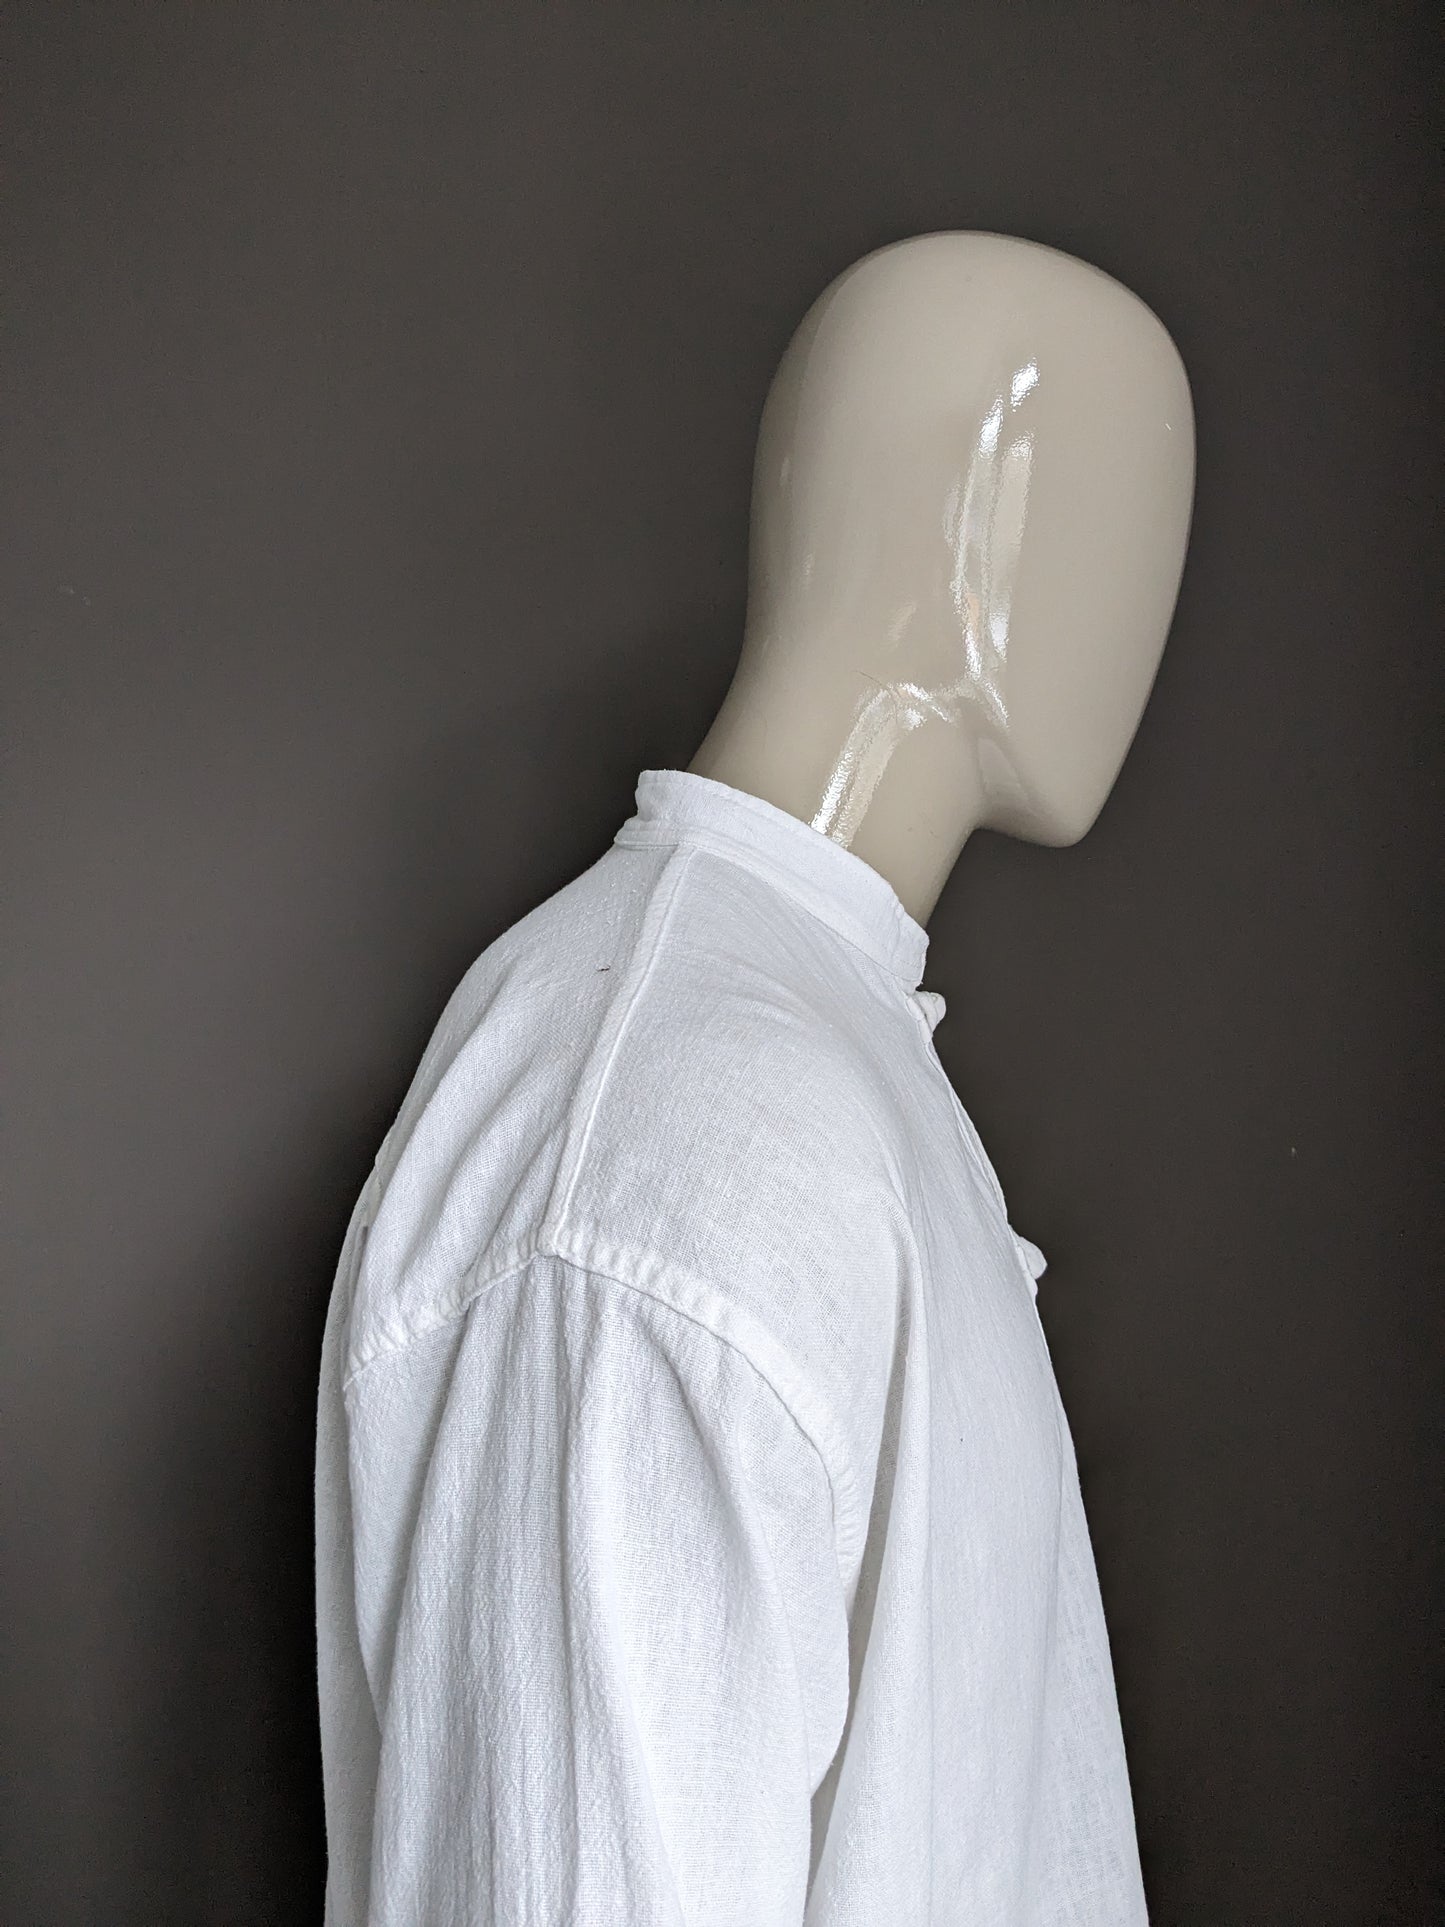 Vintage shirt with mao / raised collar. Cotton knots and bags. Size XL.